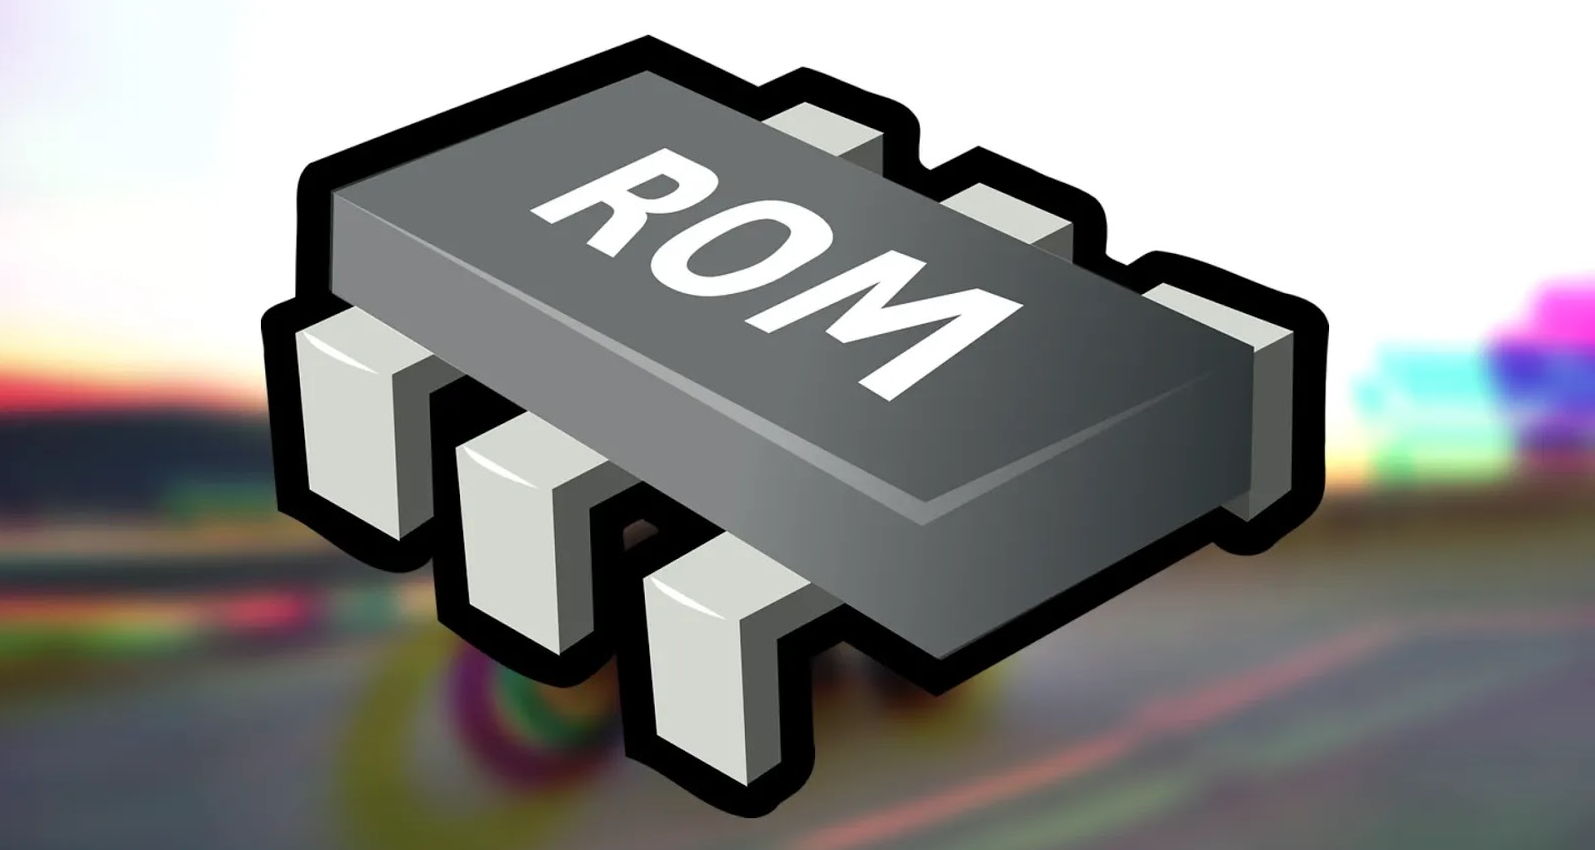 Is ROM Volatile Or Nonvolatile? (What Are The Differences?)